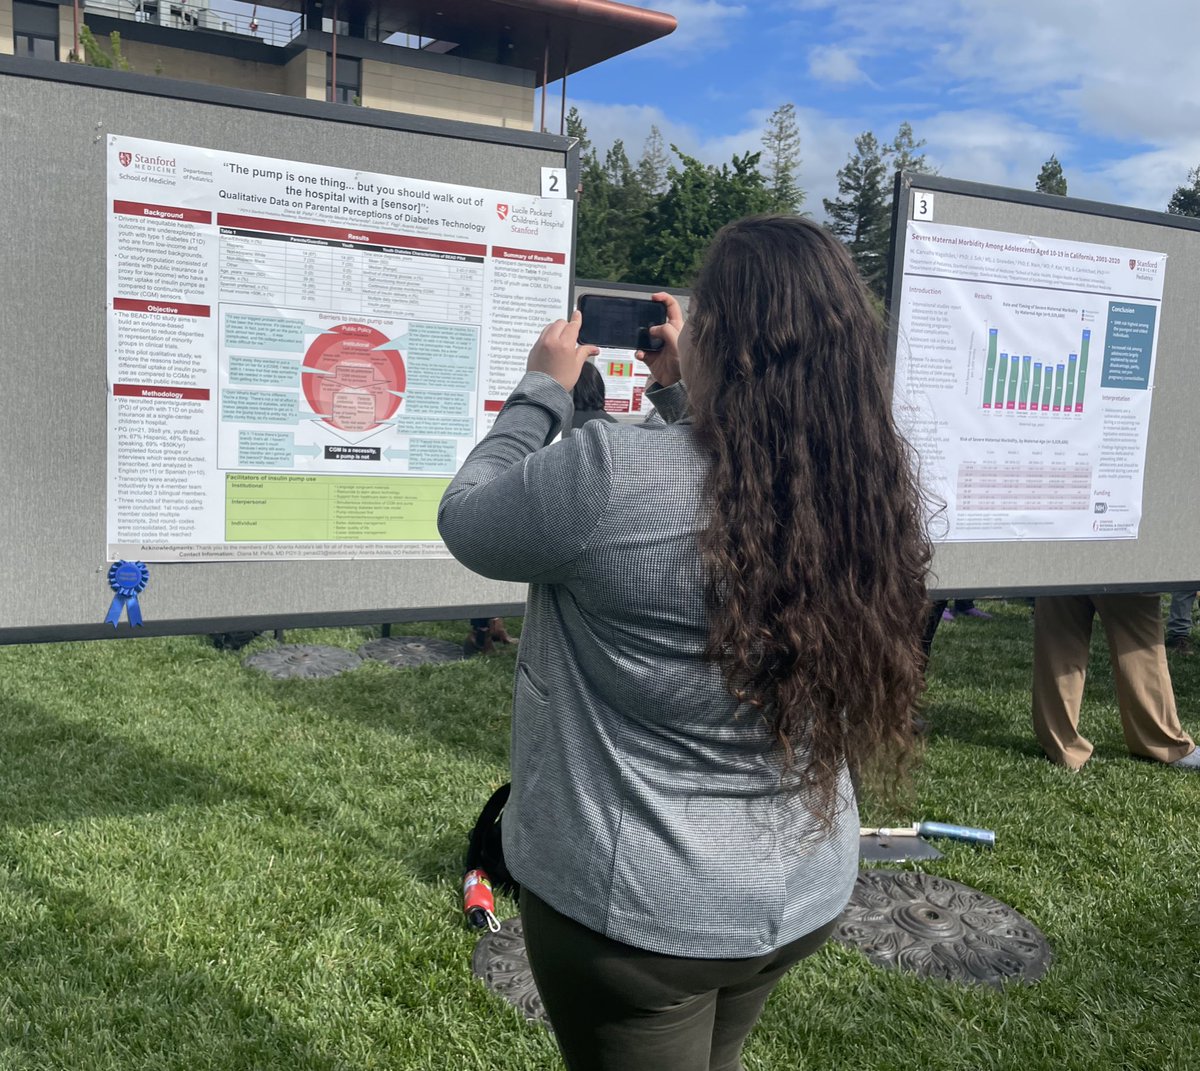 Lots of lab representation at last week’s @StanfordPeds Annual Research Retreat! Thanks to Dr. Kylie Seeley, Dr. Diana Peña, and Lauren Figg for their presentations! And shoutout to Dr. Peña, who won for Outstanding Poster Presentation! 🎉